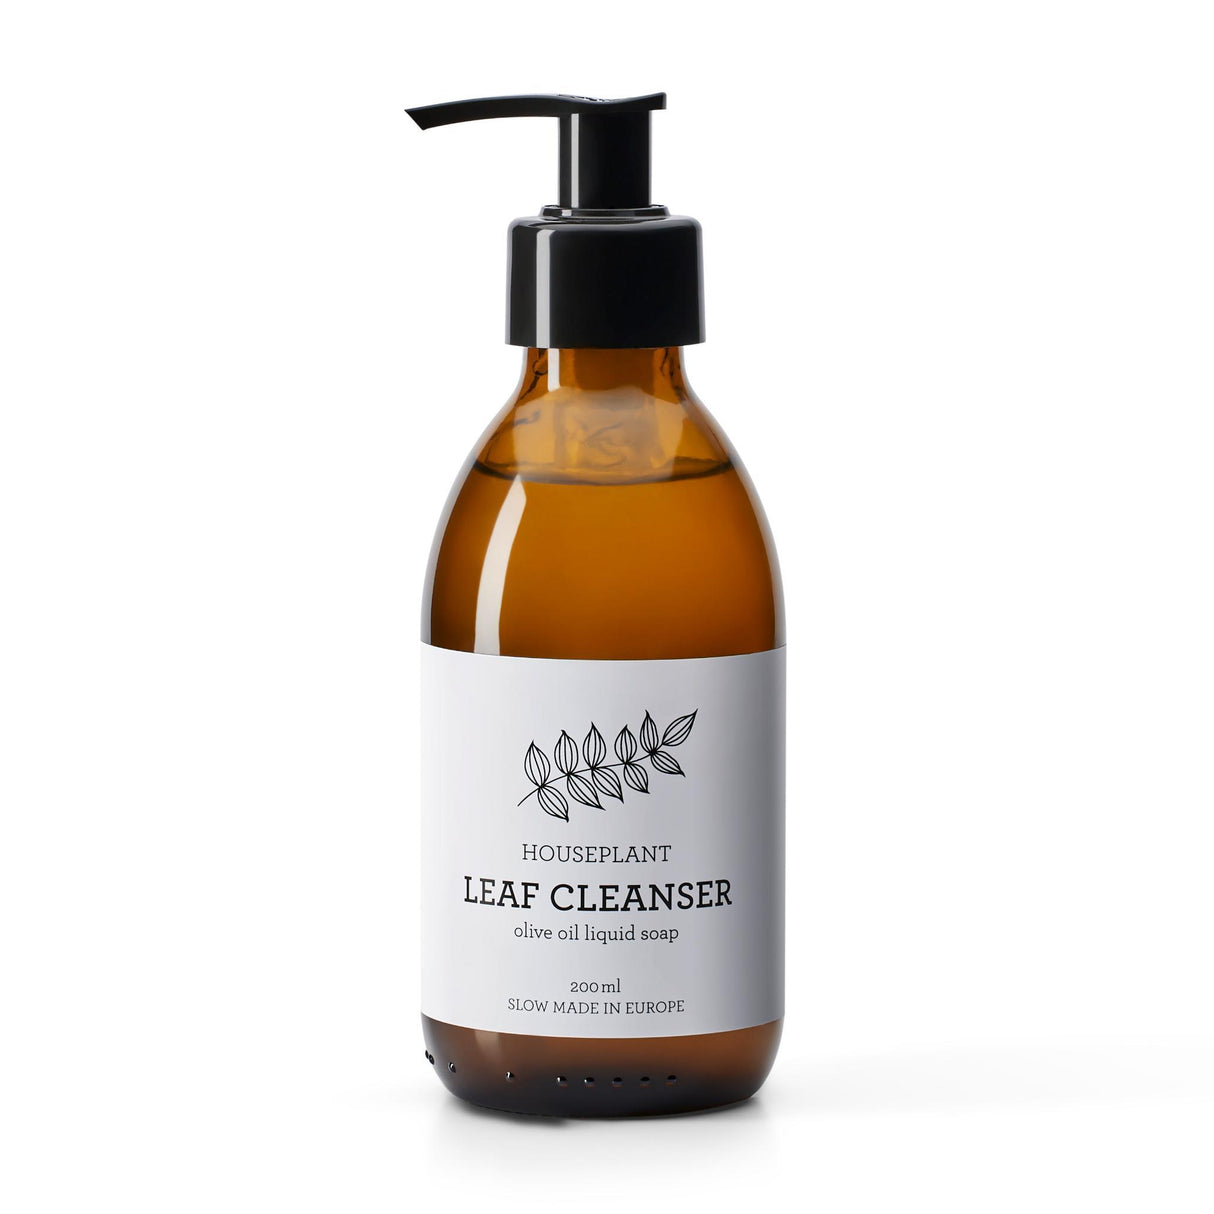 Natural houseplant cleaner - cleans and protects